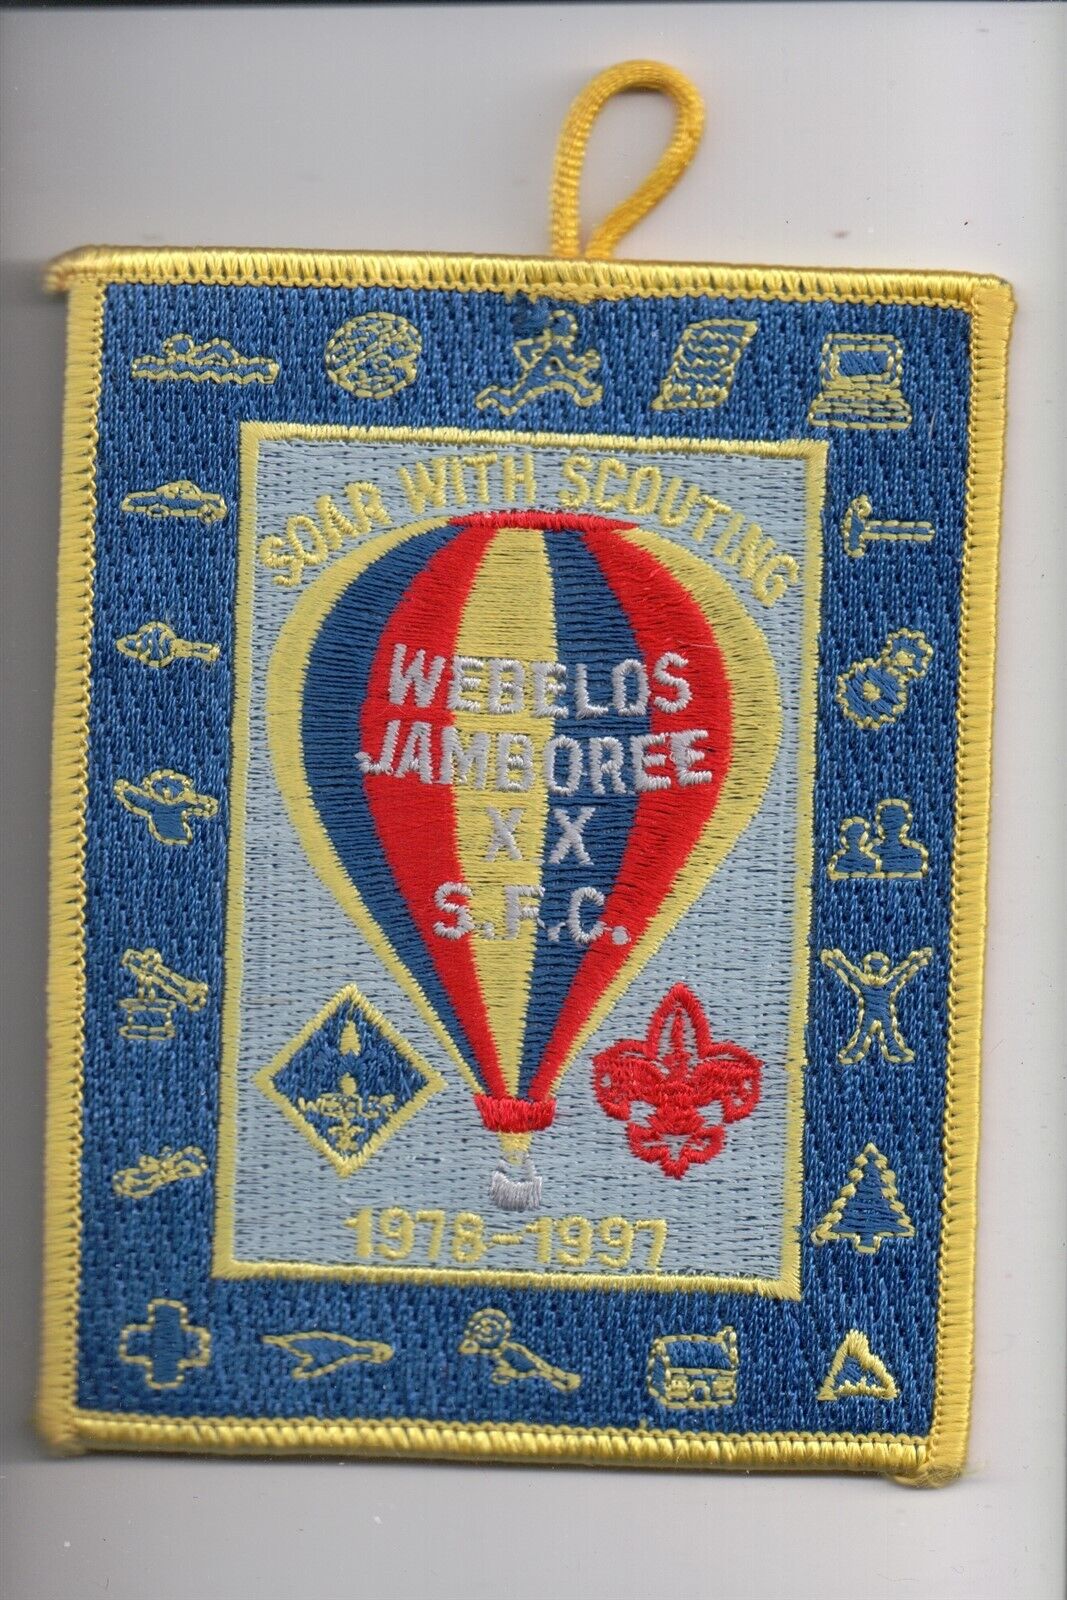 1978-1997 S.F.C. Webelos Jamboree Soar With Scouting patch